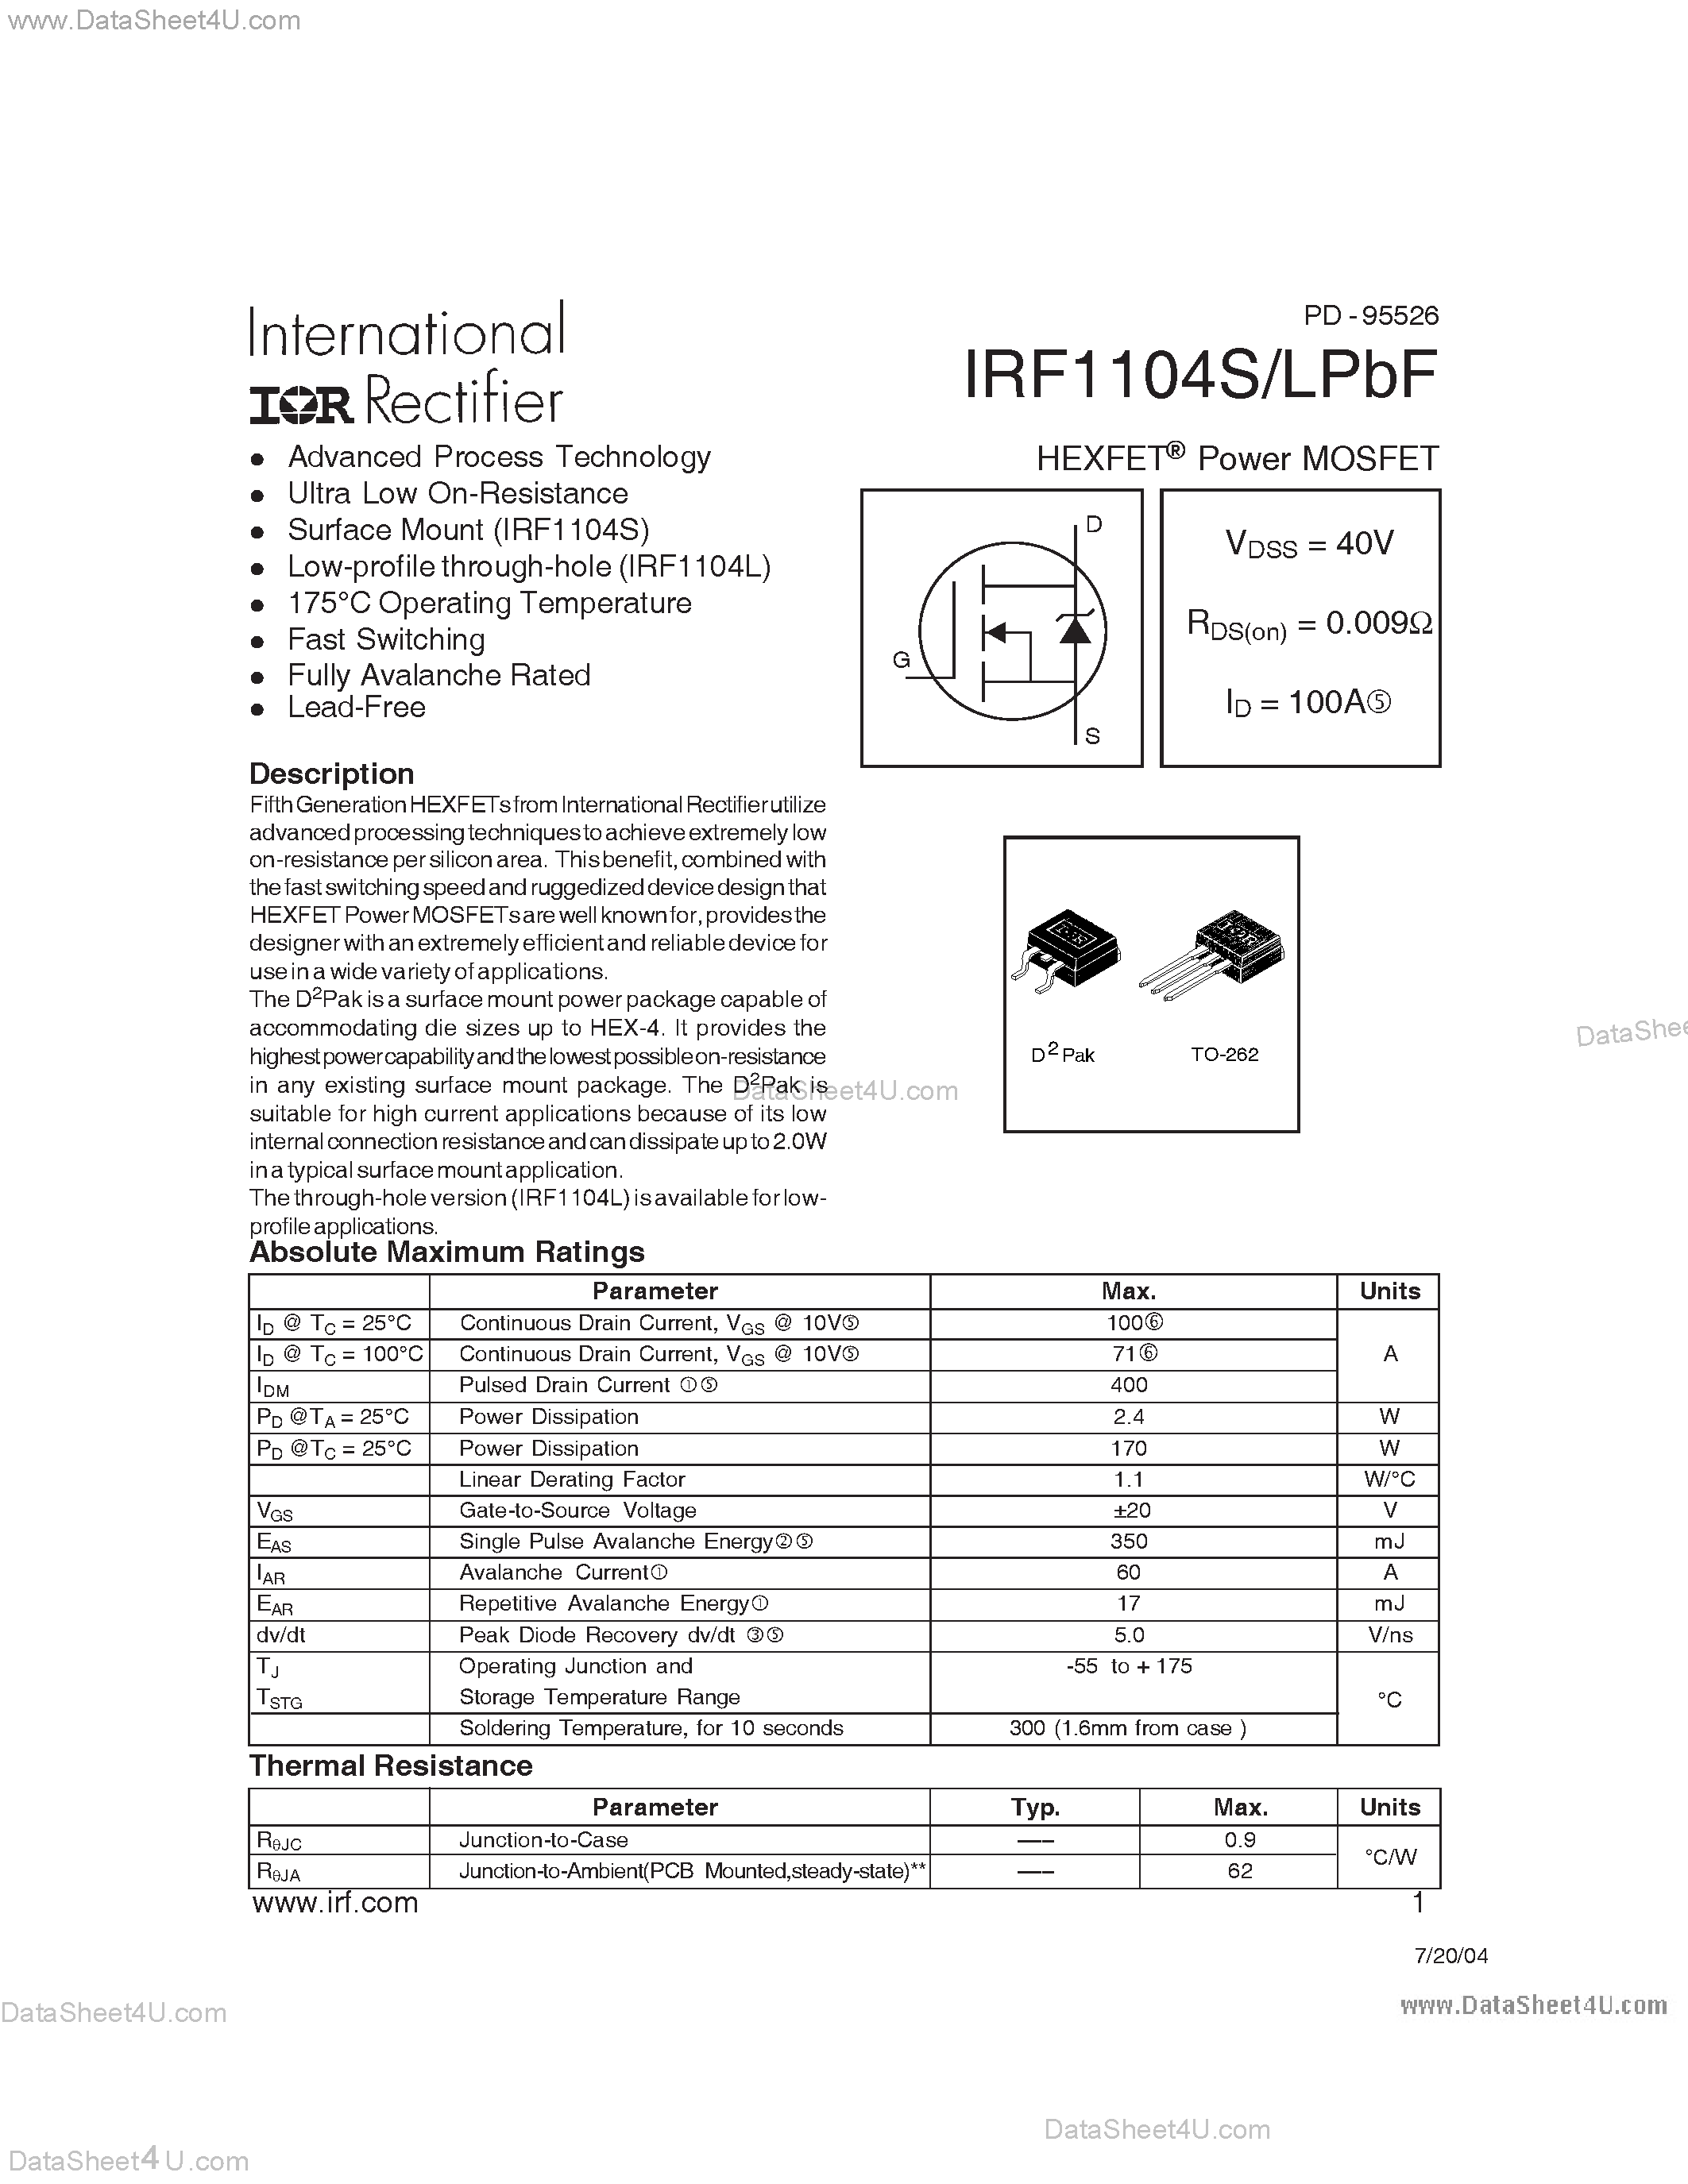 Даташит IRF1104LPBF - (IRF1104S/LPBF) HEXFET Power MOSFET страница 1